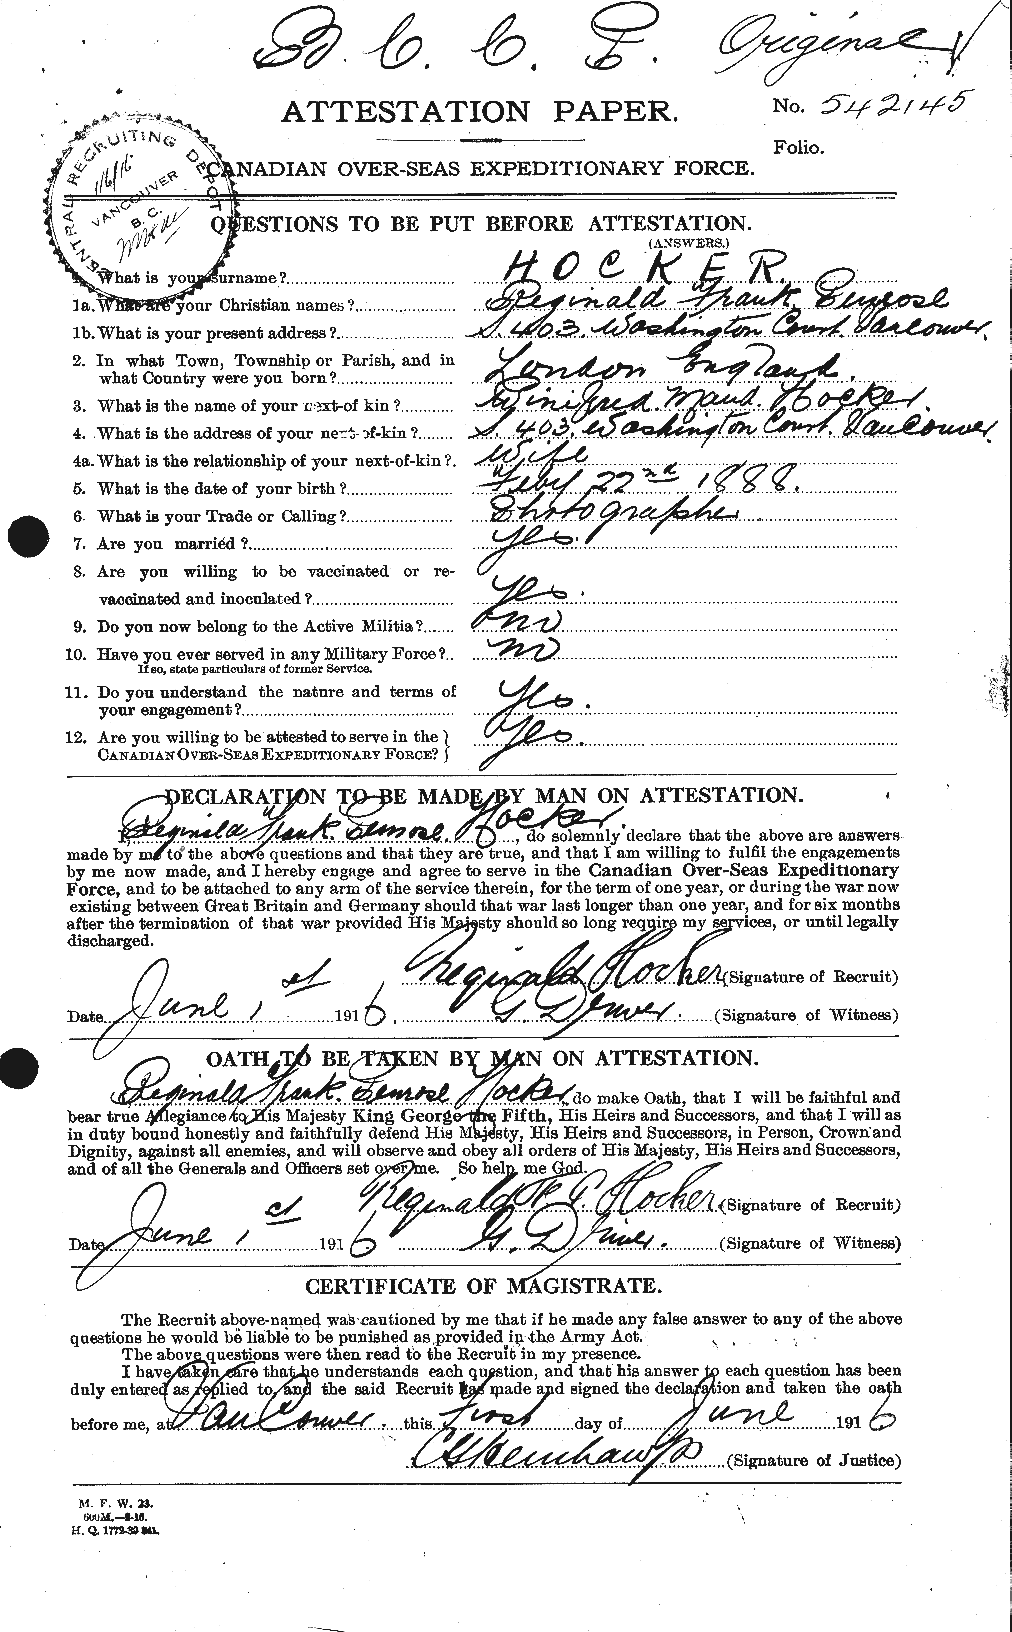 Personnel Records of the First World War - CEF 397682a